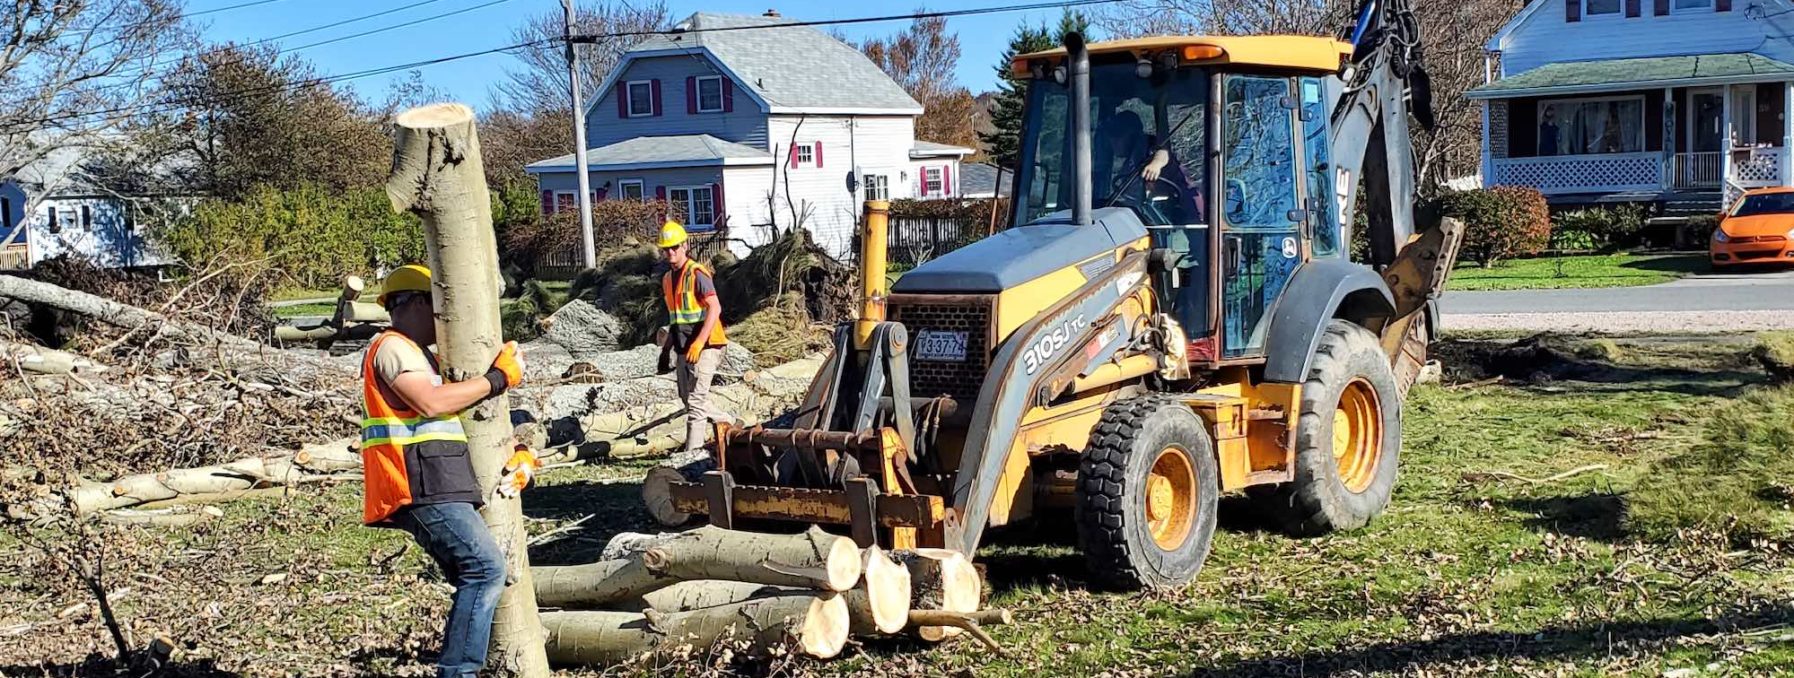 Volunteers move cut up trees with a front end loader in Nova Scotia